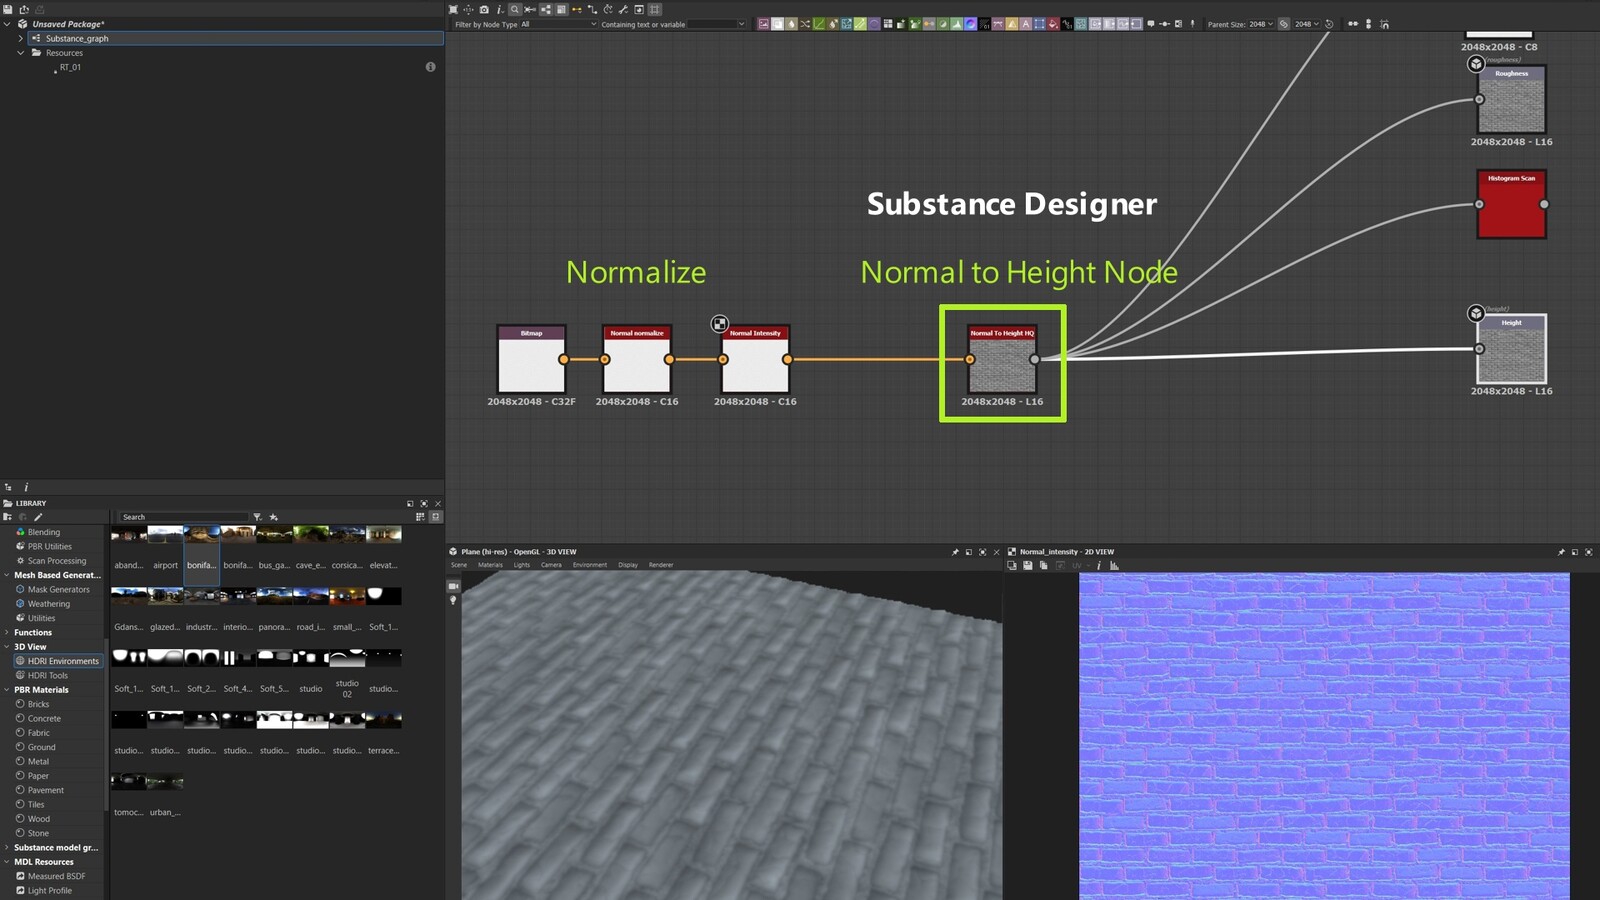 Once in substance designer use a normalized normal node and the normal to height (HQ) node.